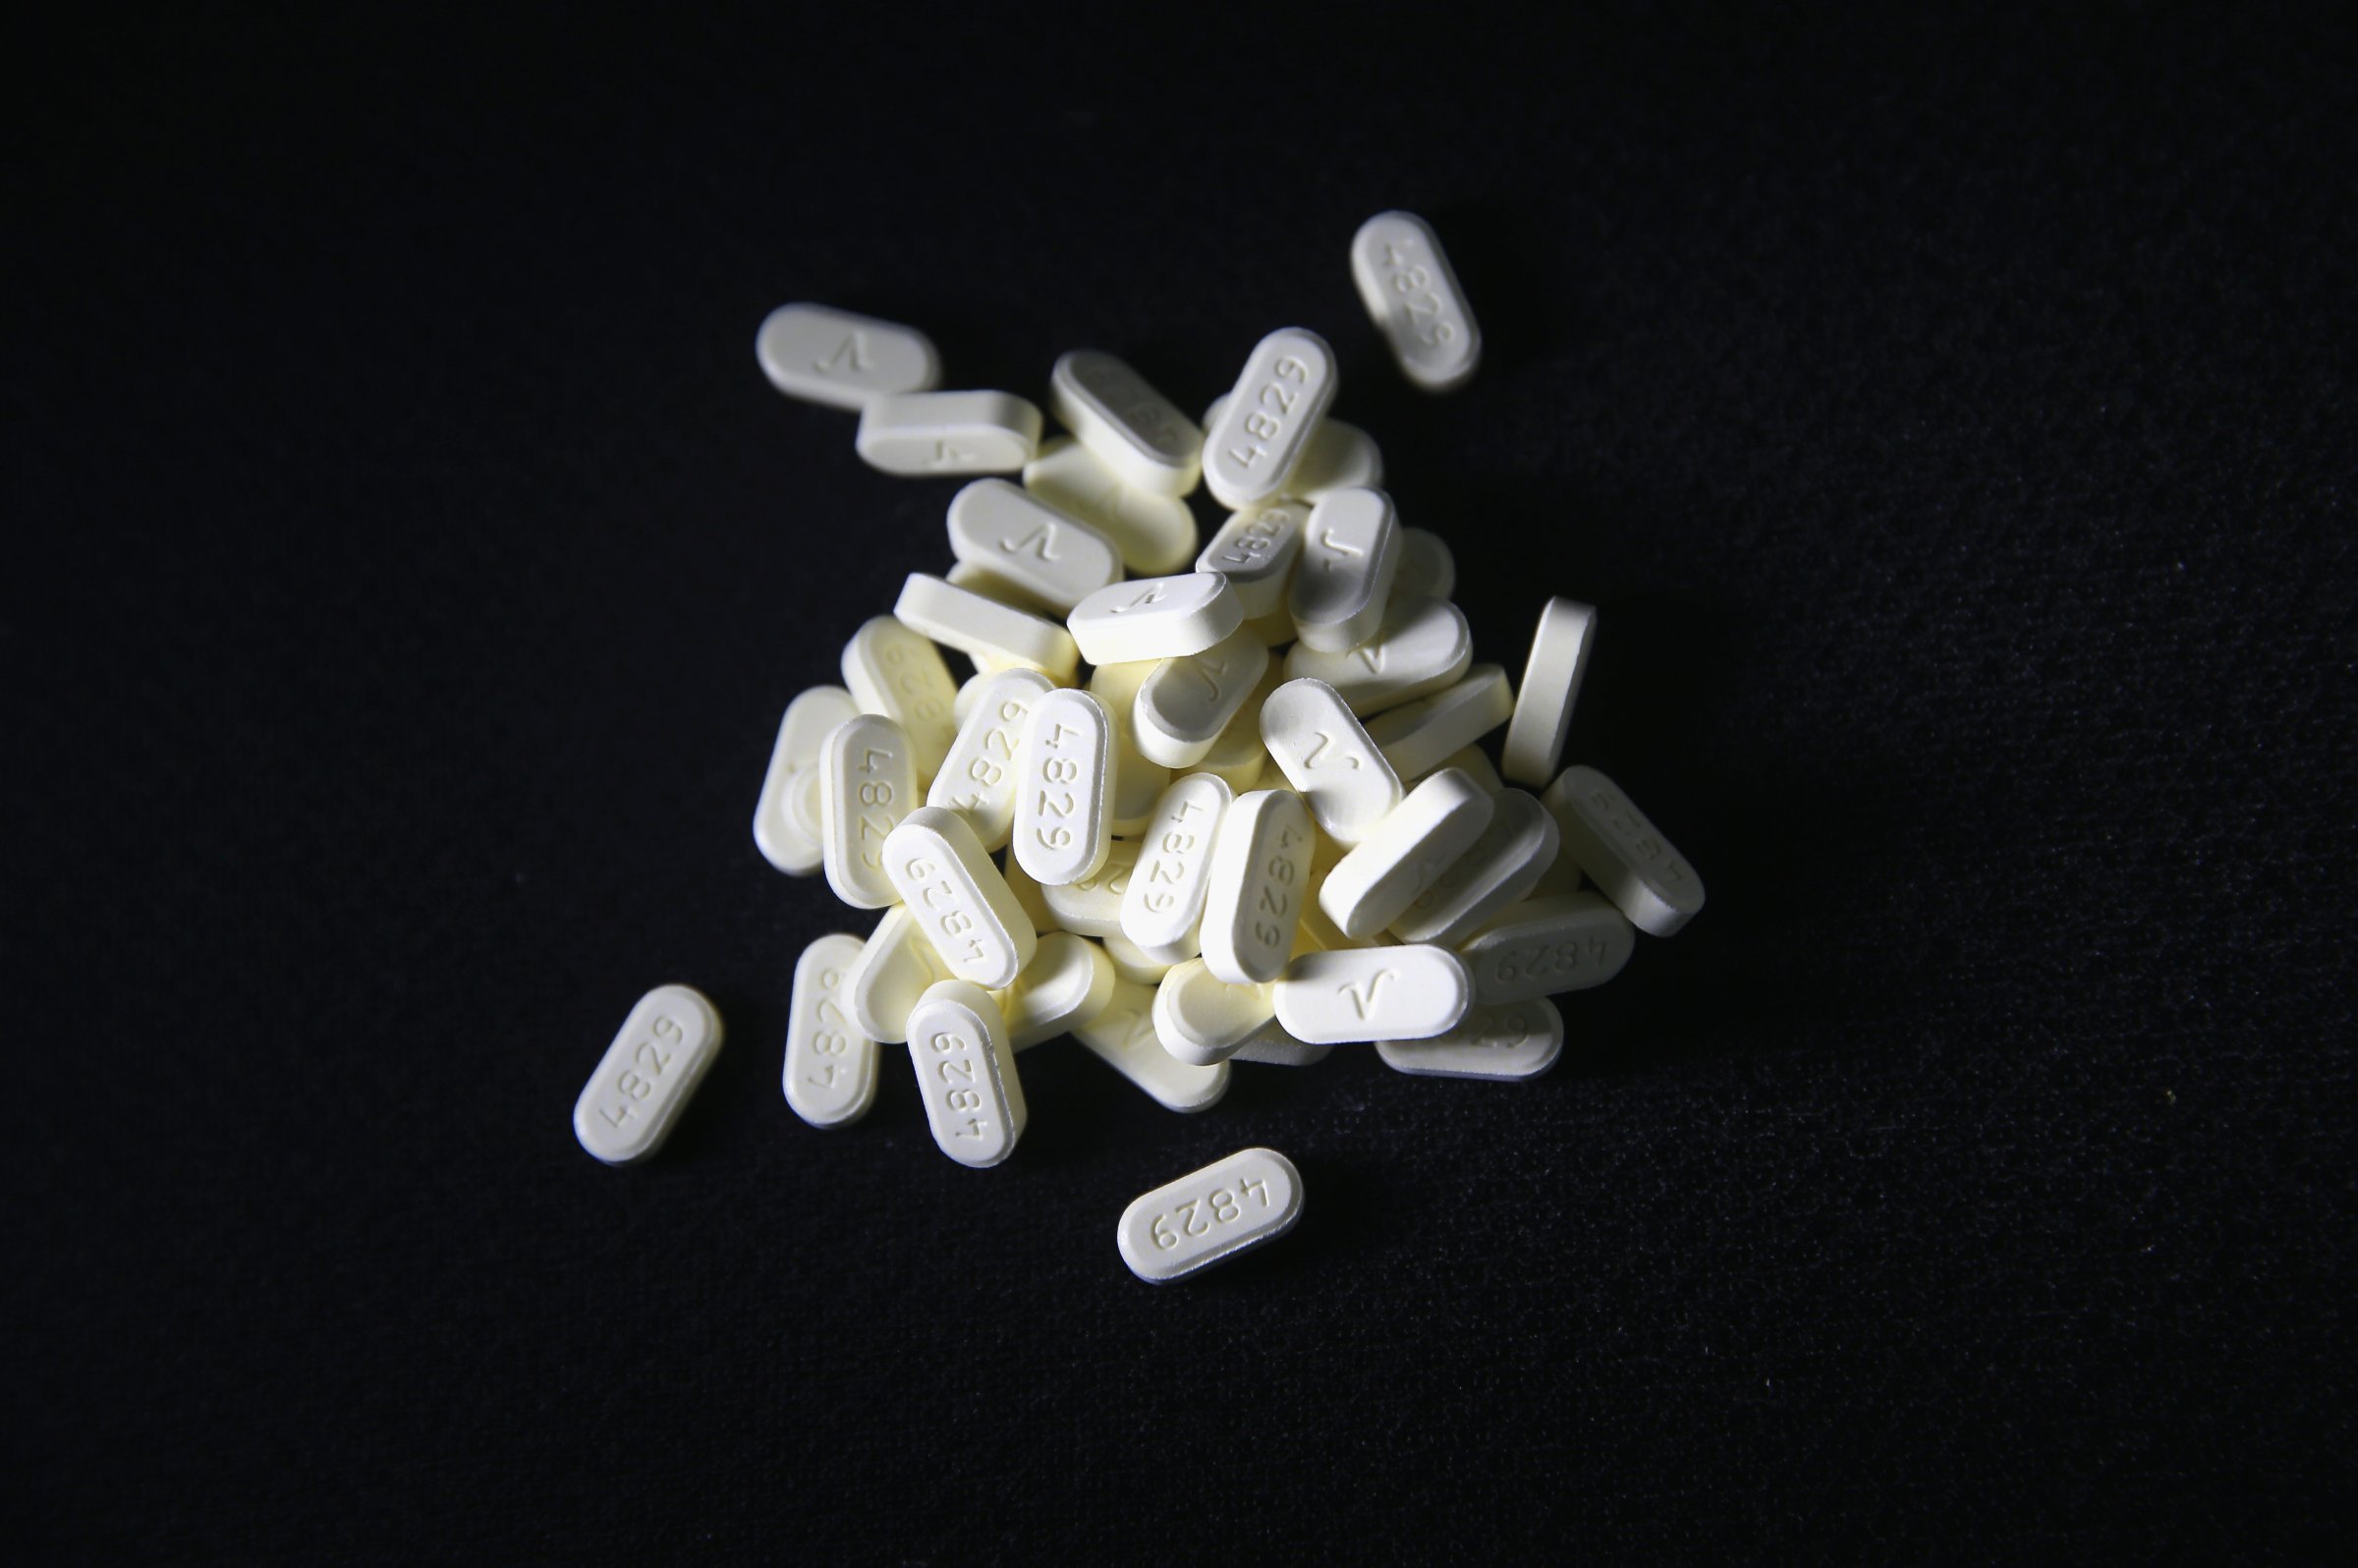 Oxycodone pain pills prescribed for a patient with chronic pain lie on display in Norwich, CT on March 23, 2016.